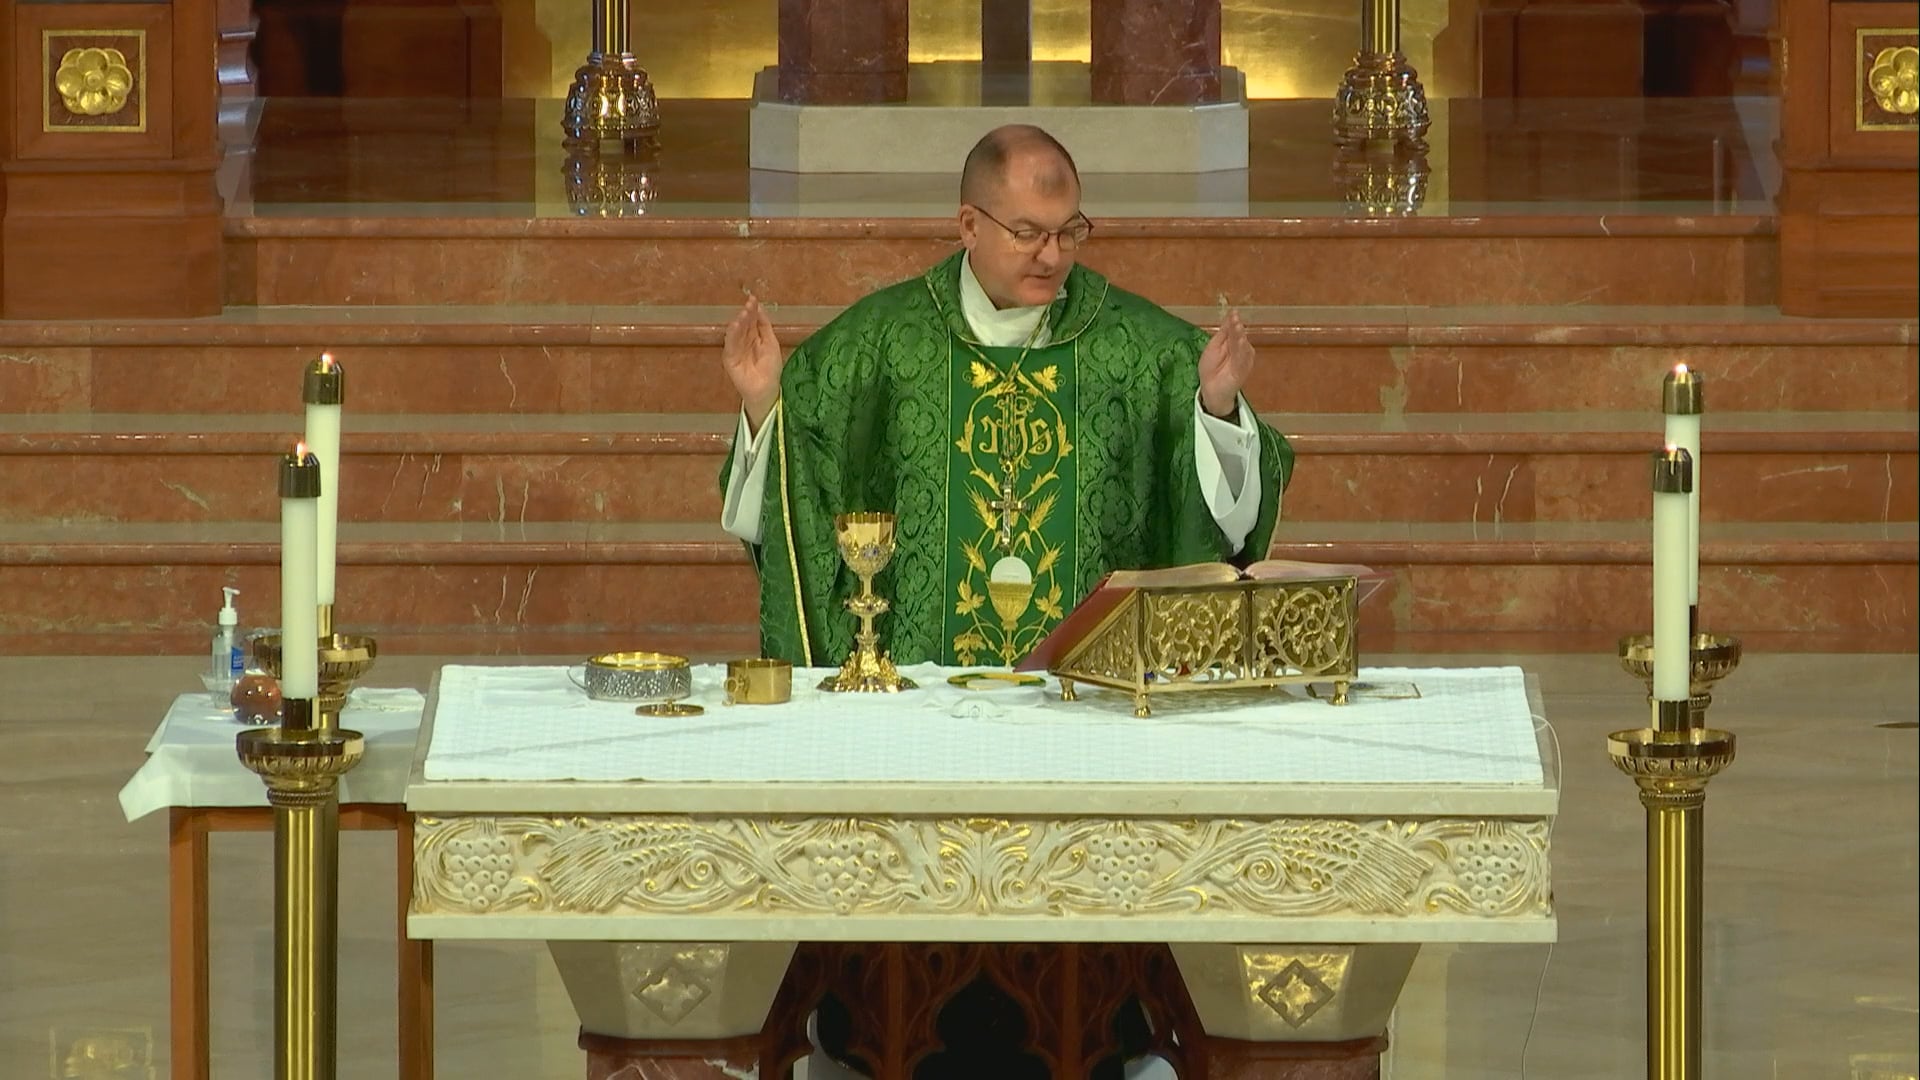 Mass from St. Agnes Cathedral - August 31, 2022